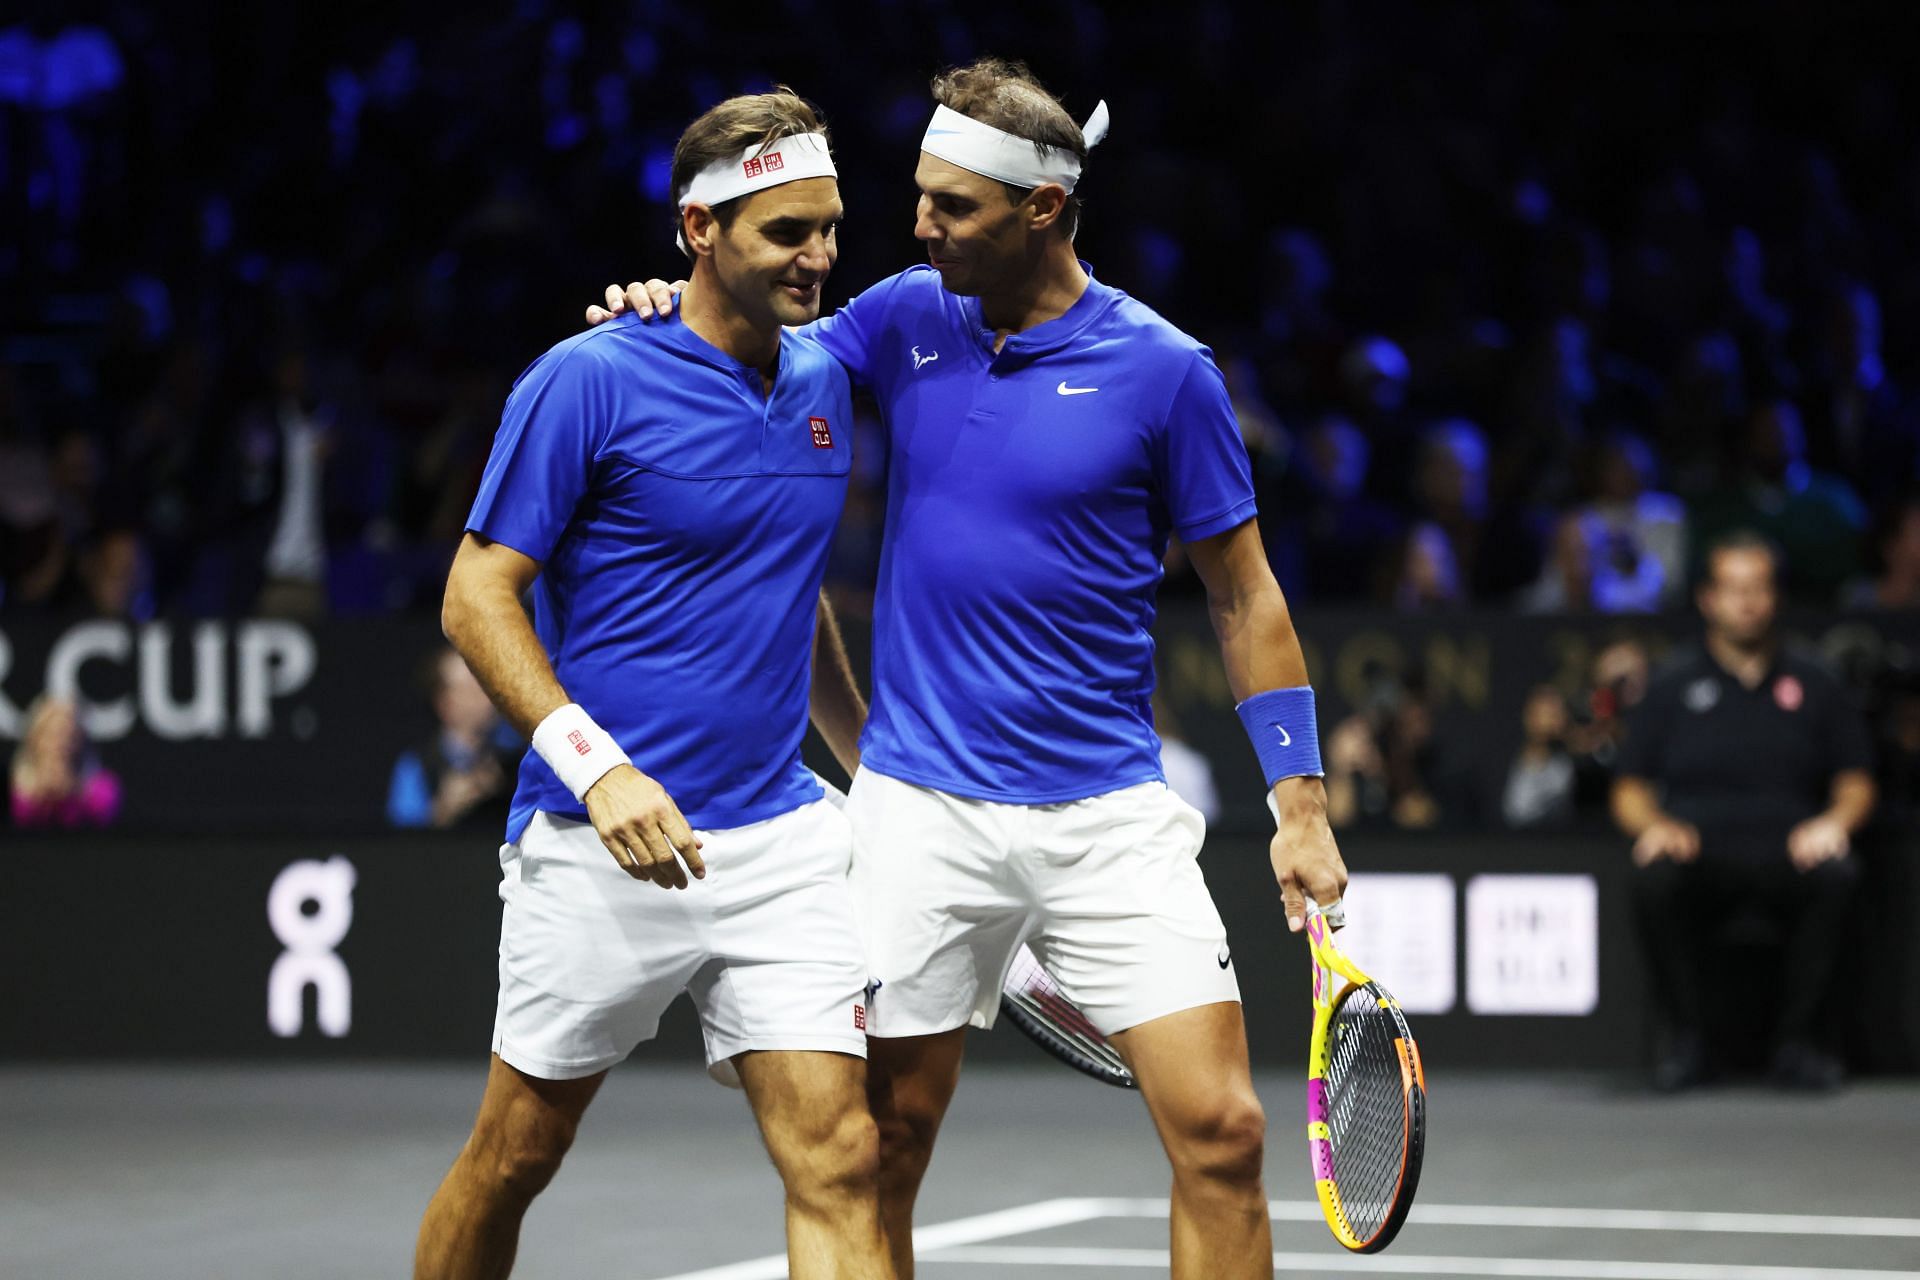 Federer and Nadal at the 2022 Laver Cup